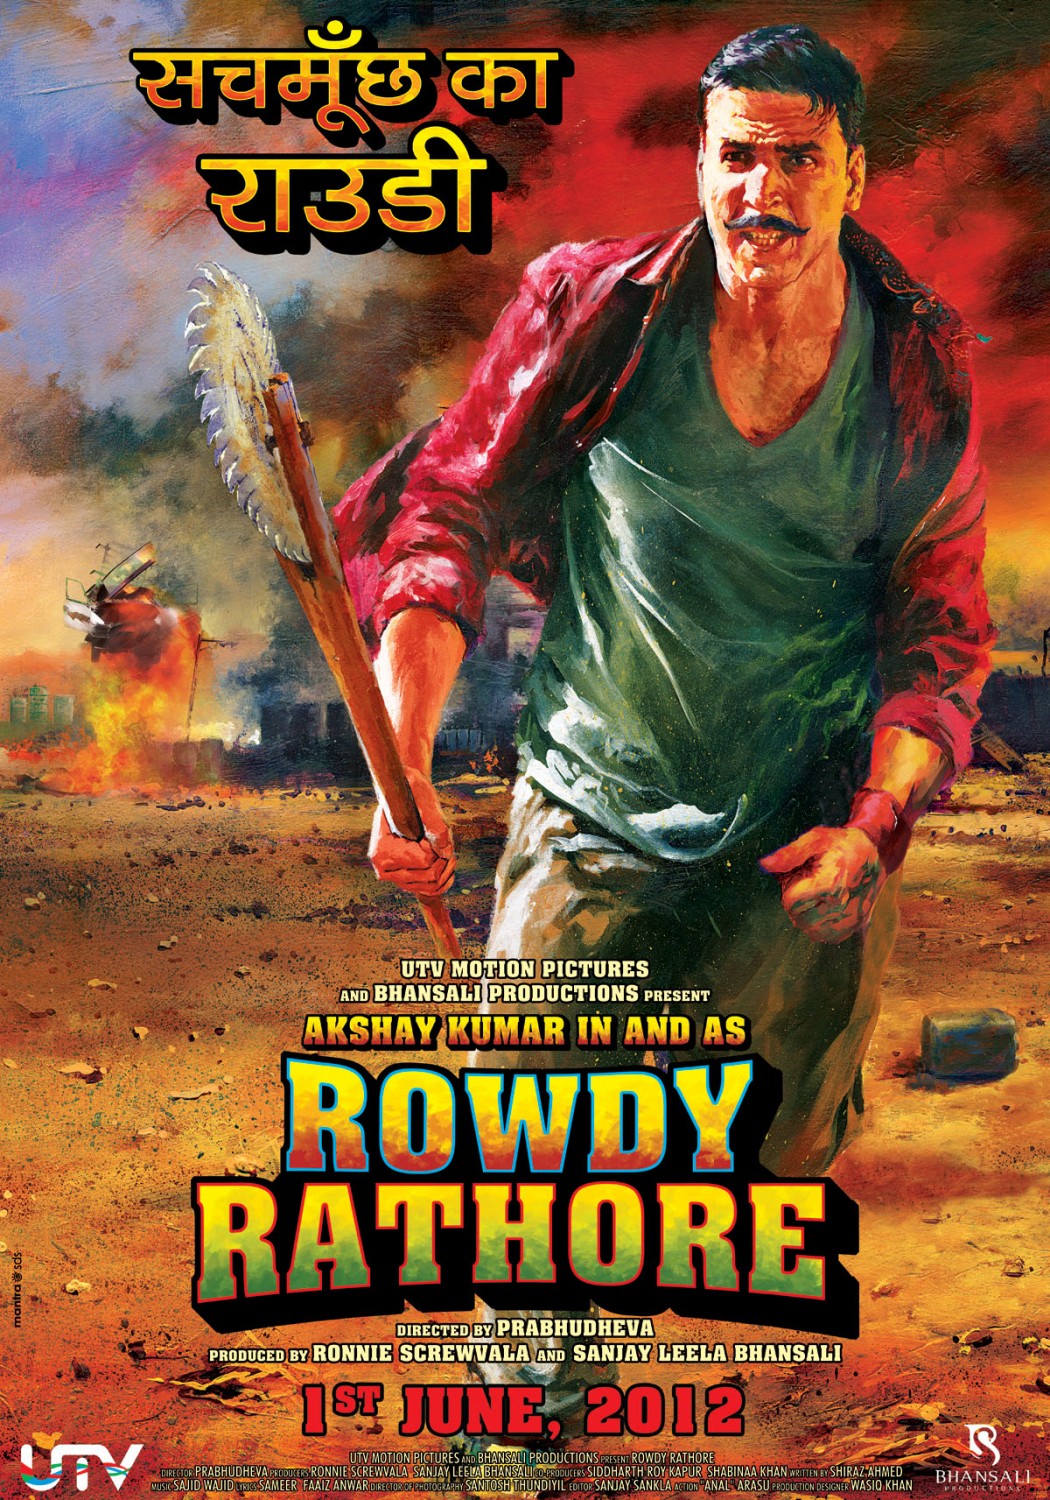 Extra Large Movie Poster Image for Rowdy Rathore (#7 of 7)